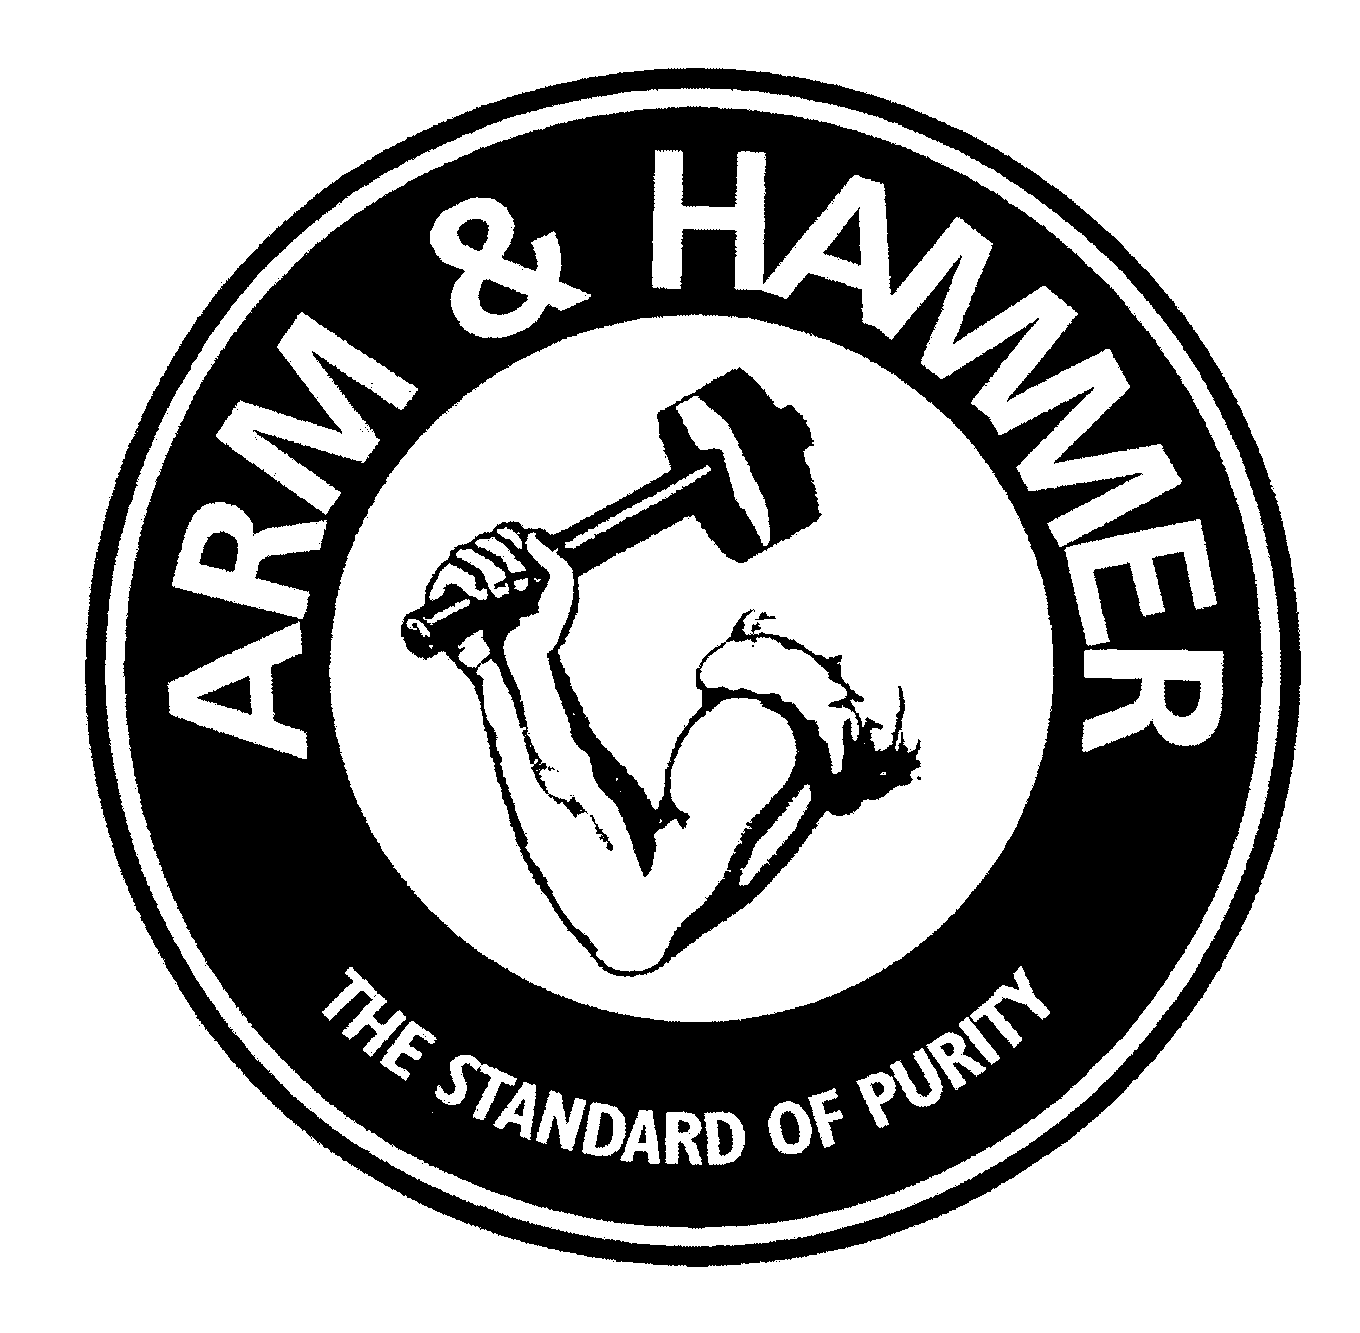  ARM &amp; HAMMER THE STANDARD OF PURITY